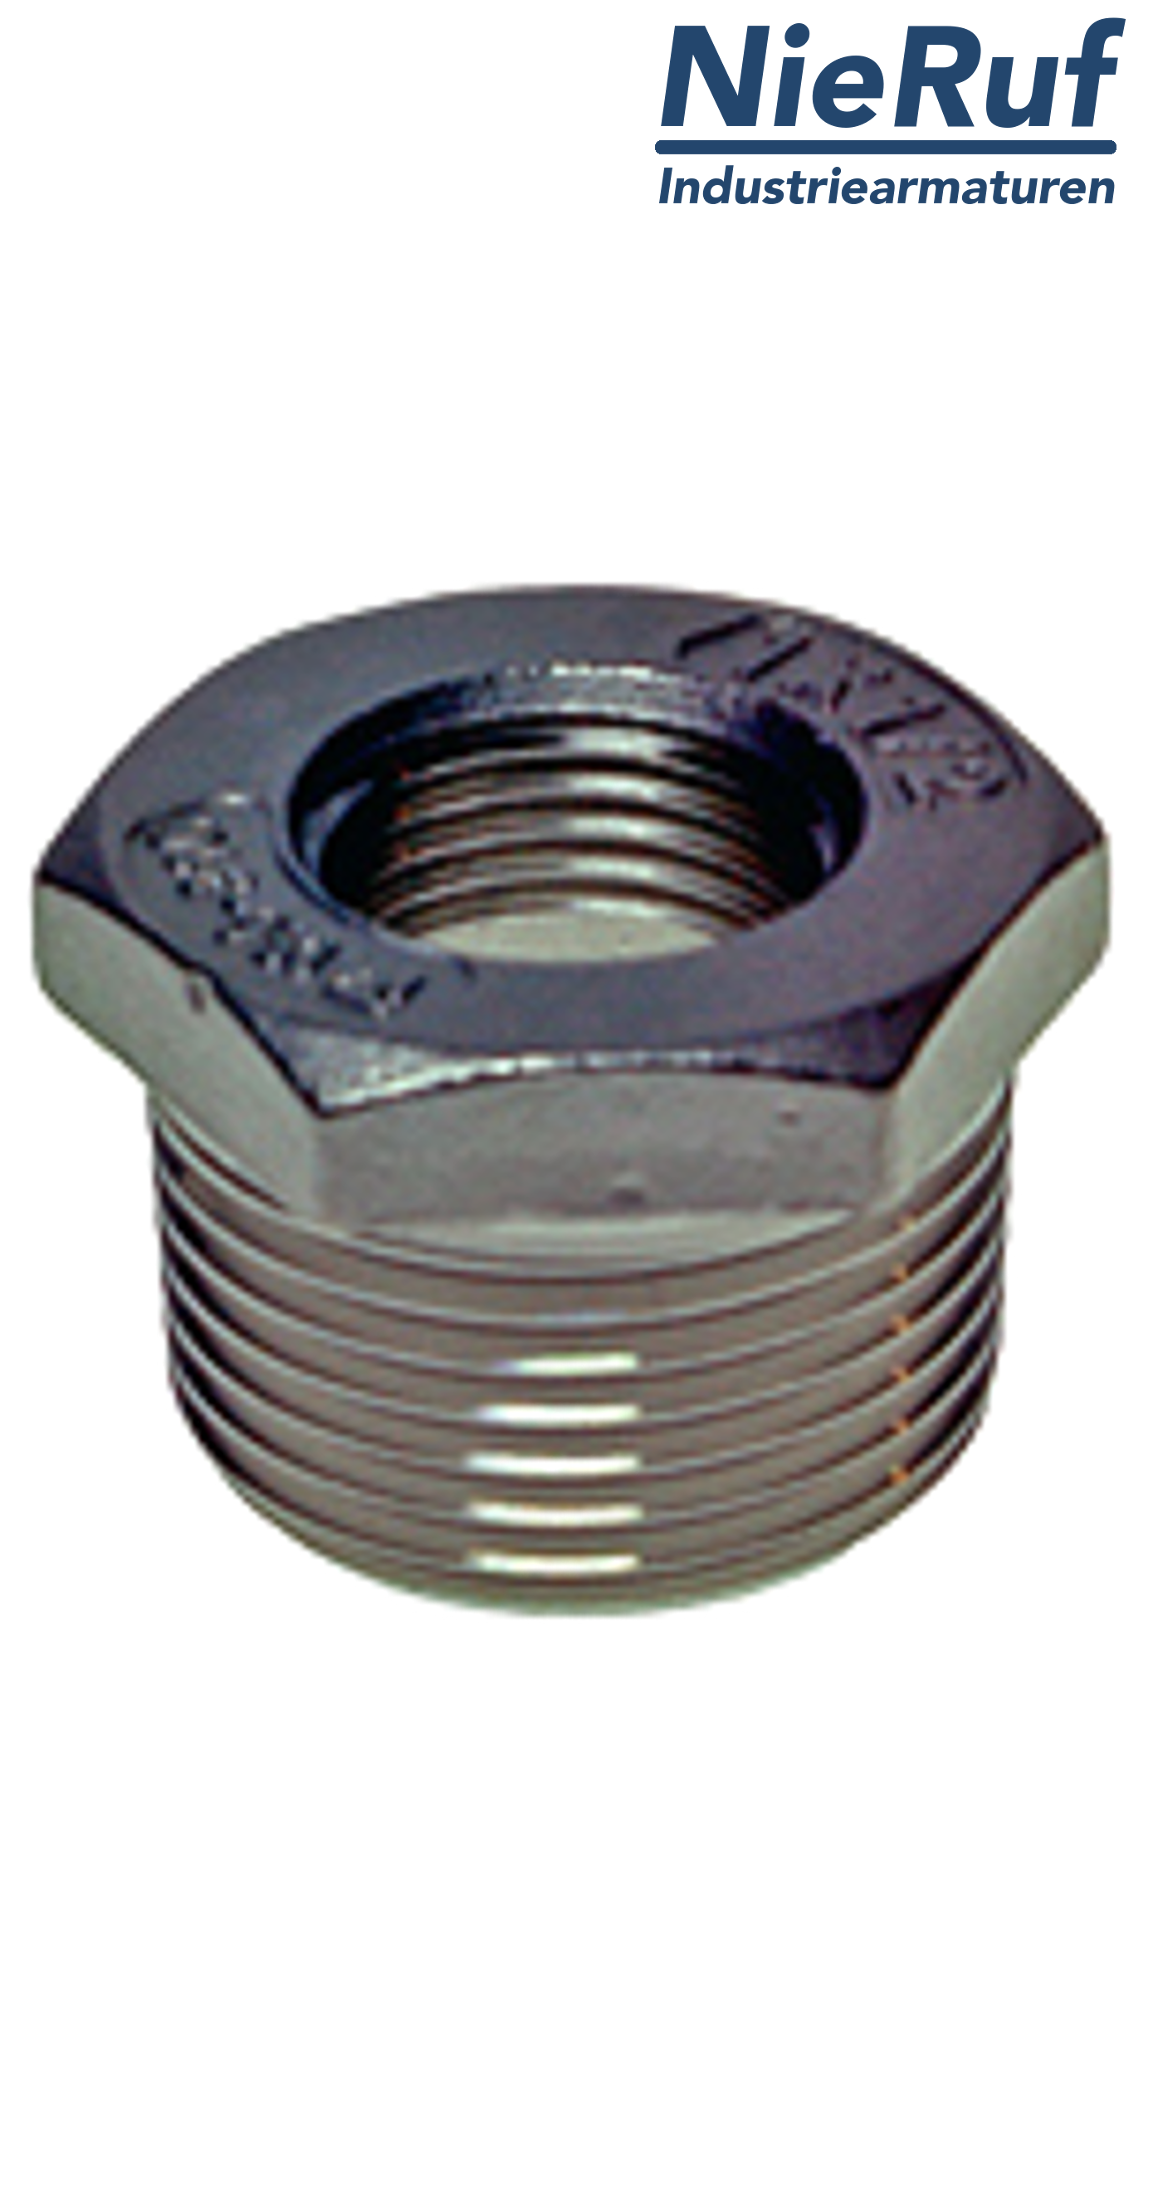 reducing bush 3/4" x 1/4" inch NPT male X female stainless steel 316L